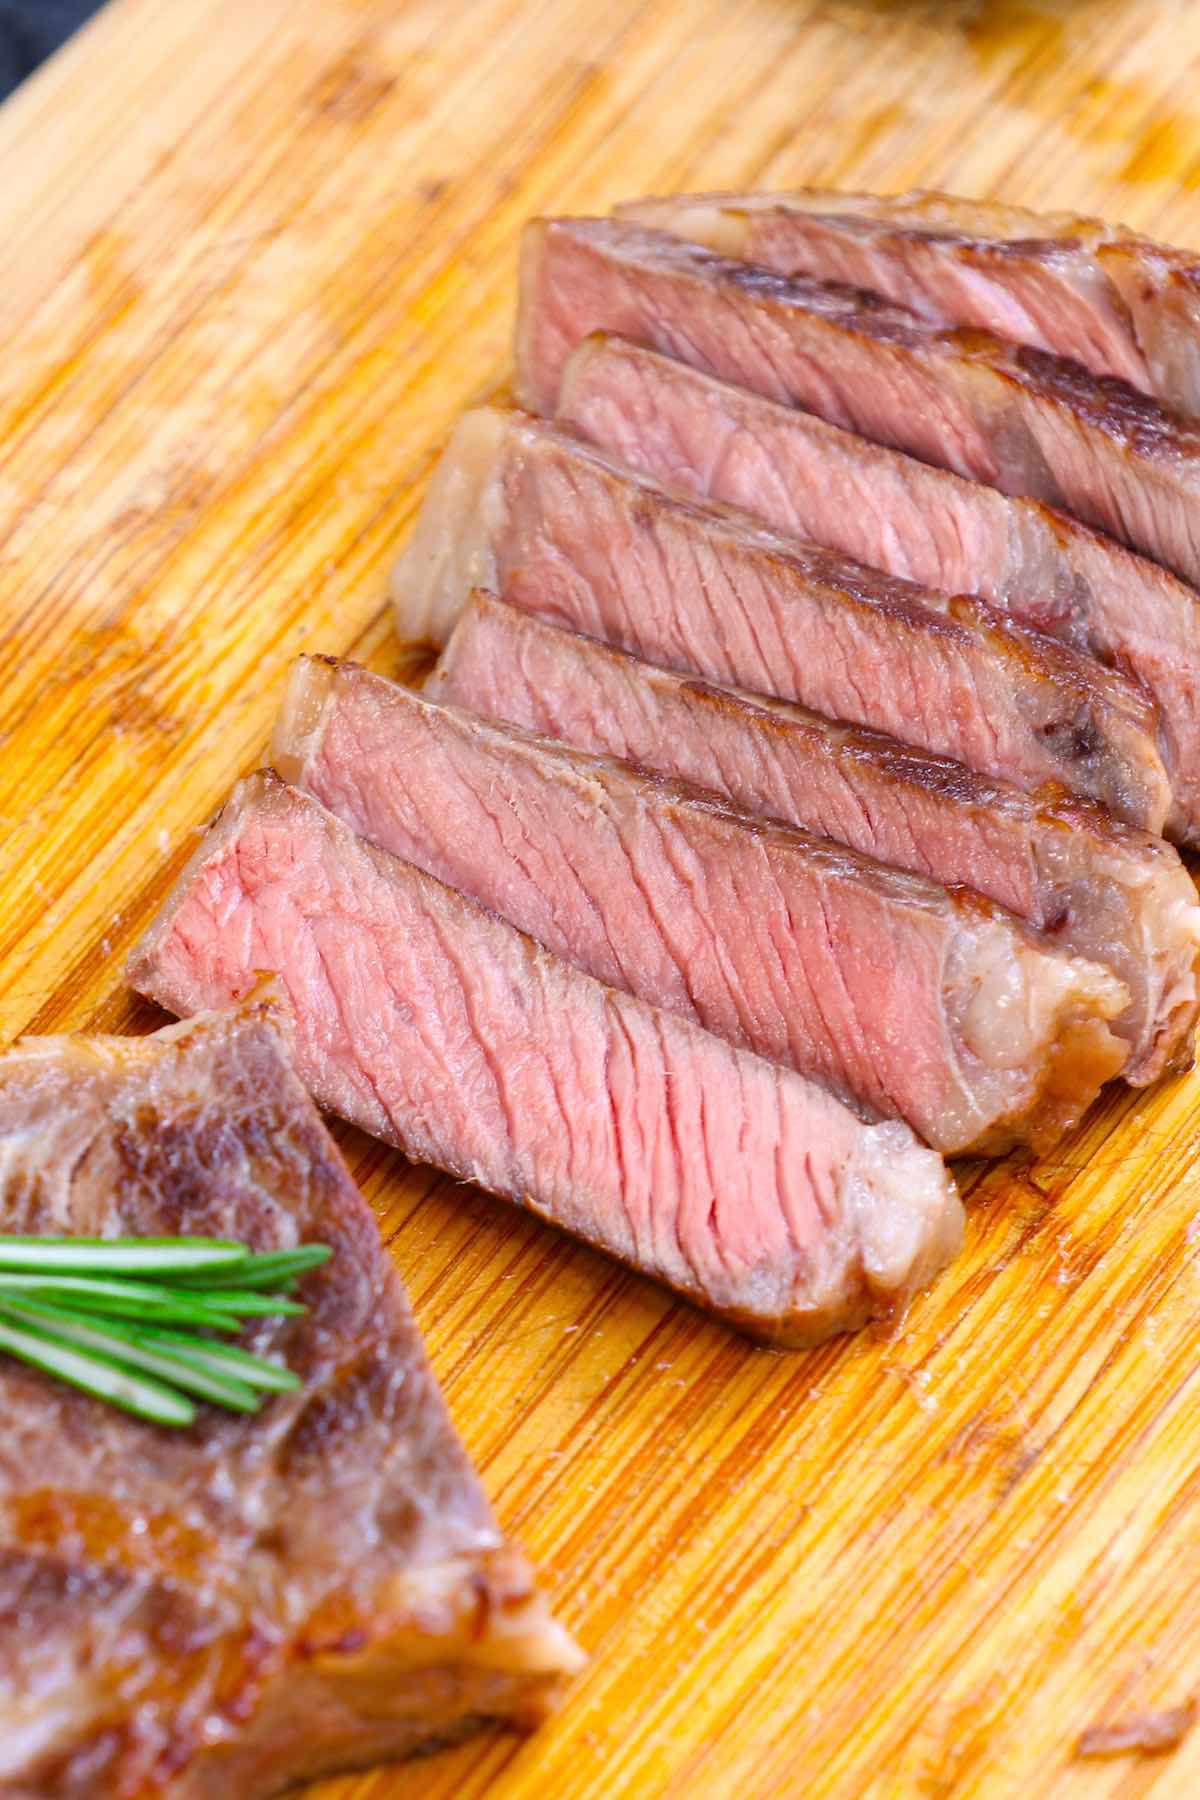 Slices of New York strip on a carving board showing a pale pink color